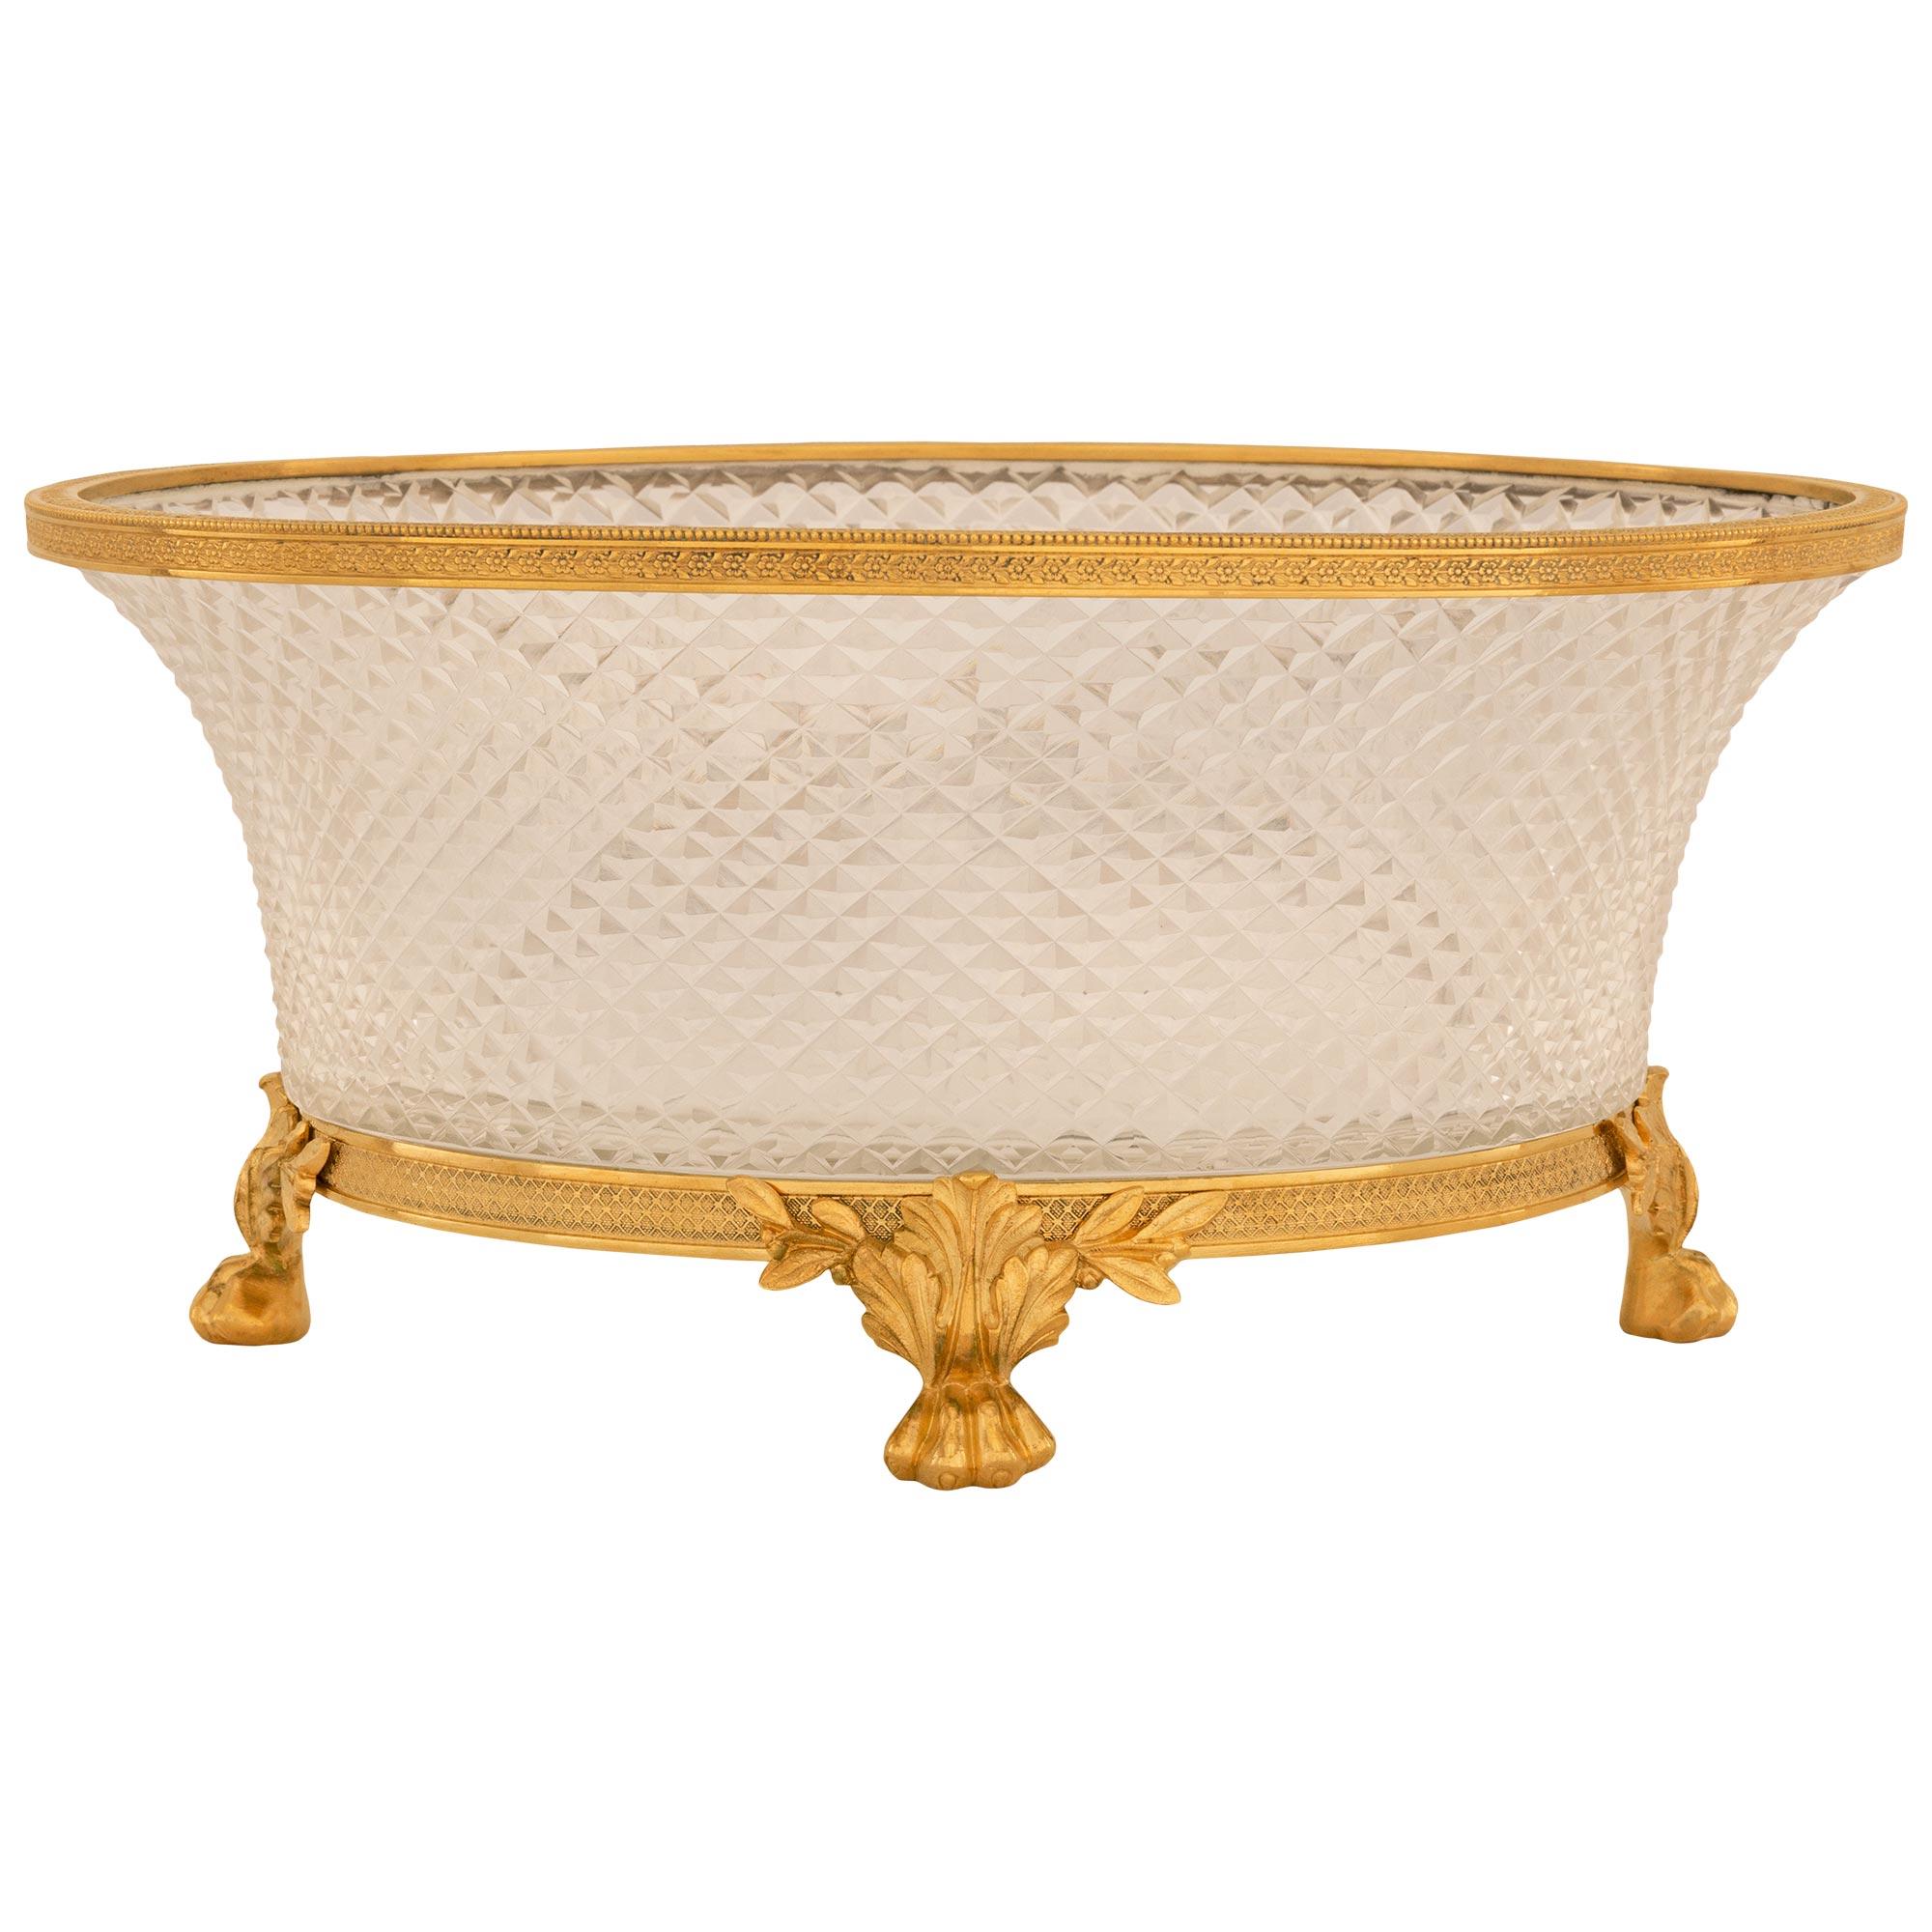 Neoclassical French 19th Century Belle Époque Period Baccarat Crystal and Ormolu Centerpiece For Sale